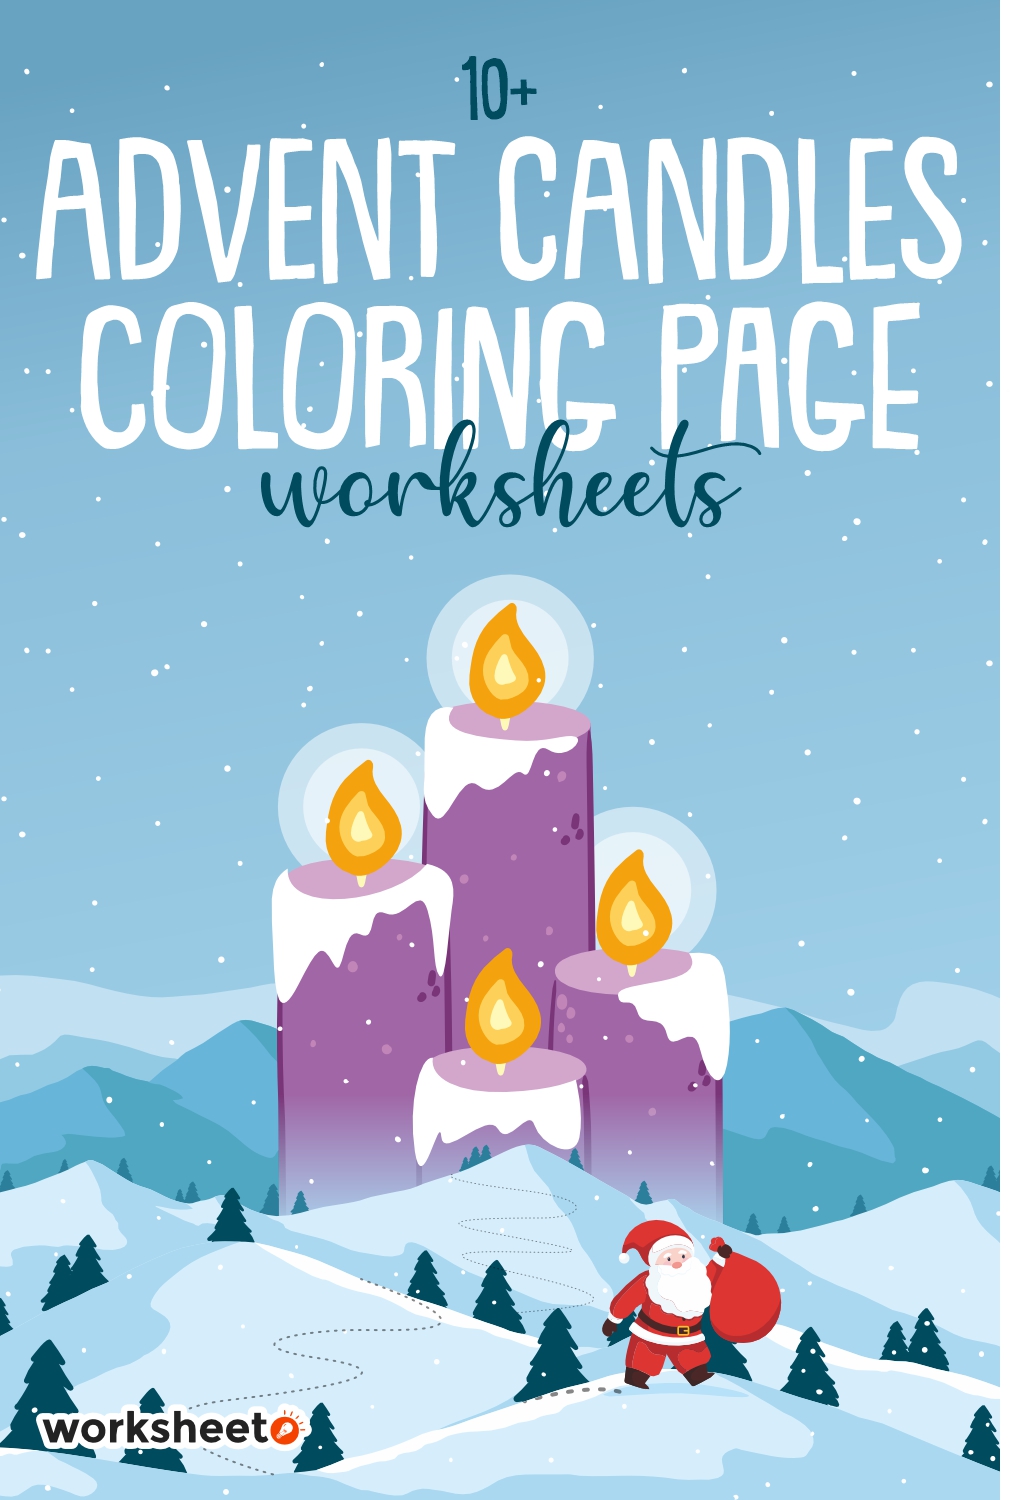 12 Images of Advent Candles Coloring Page Worksheets